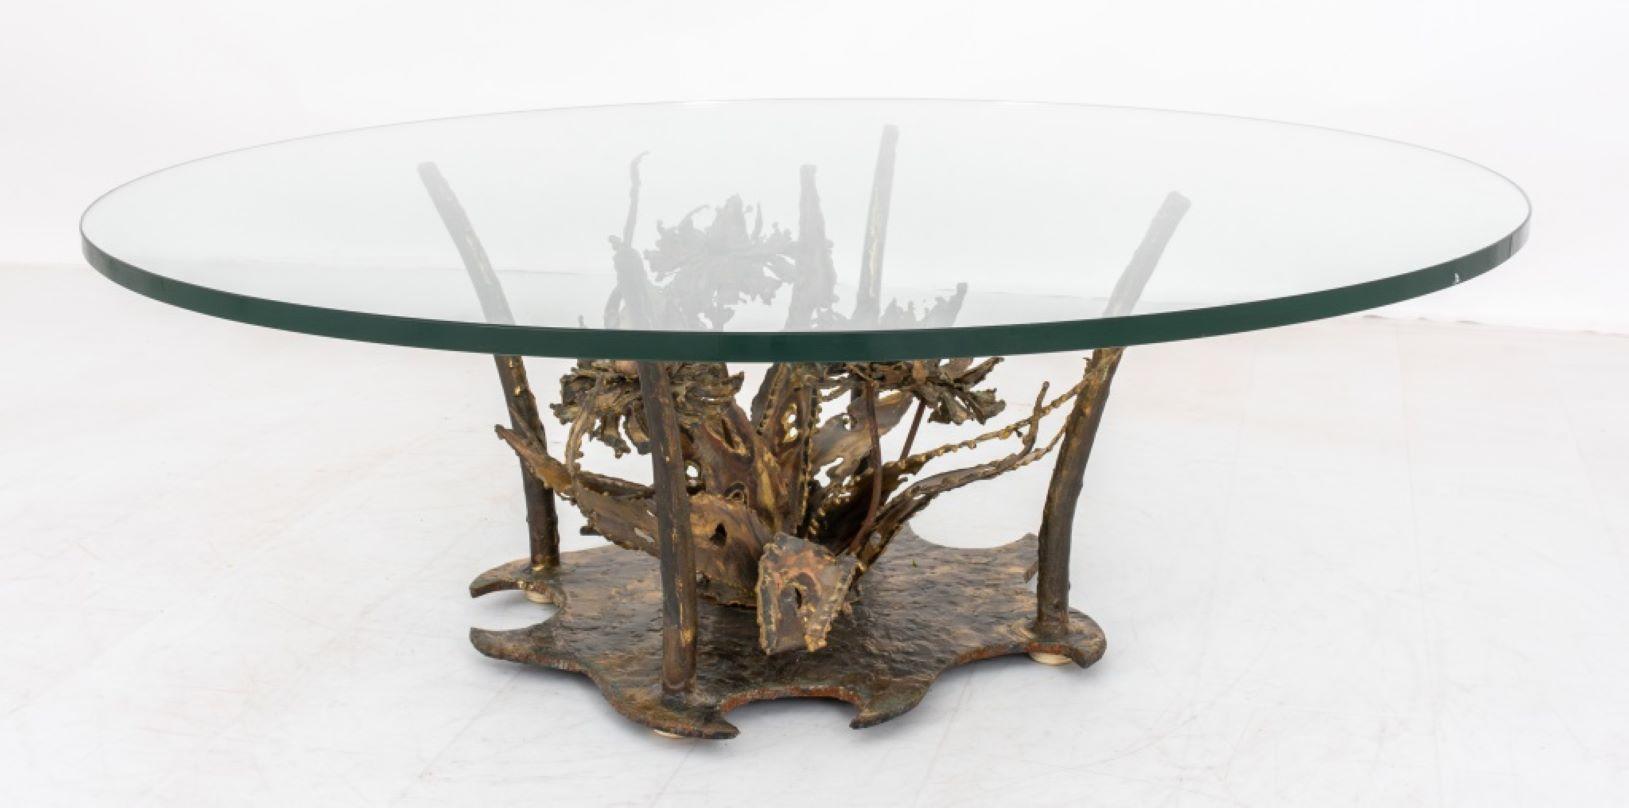 Silas Seandel (American, b. 1937) Bronze and Glass Low, Cocktail, or Coffee Table, from the